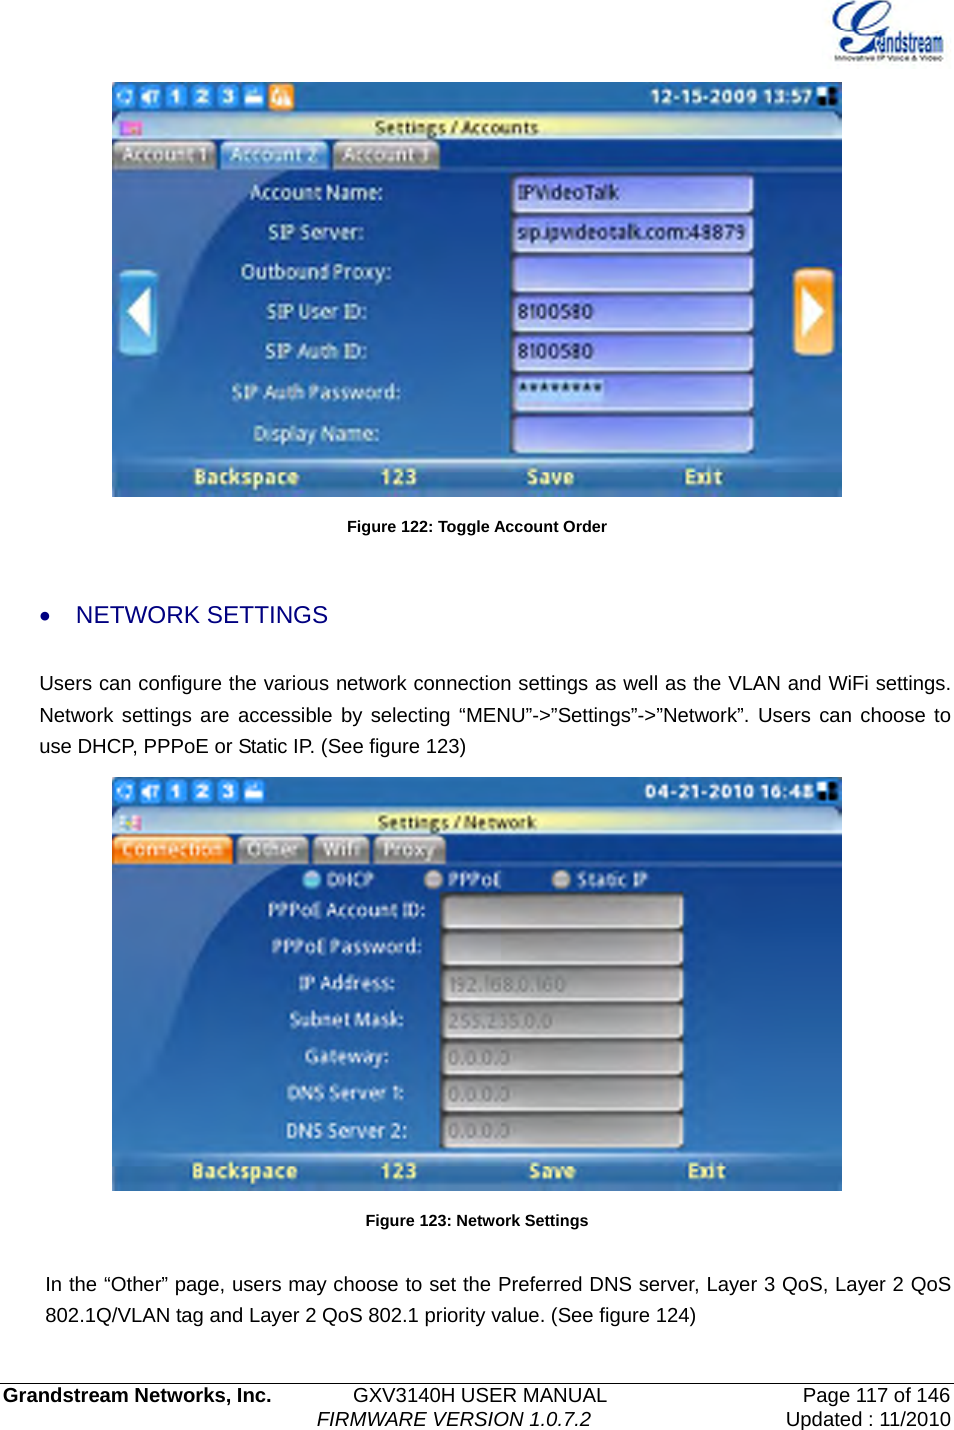   Grandstream Networks, Inc.        GXV3140H USER MANUAL                  Page 117 of 146                                FIRMWARE VERSION 1.0.7.2 Updated : 11/2010   Figure 122: Toggle Account Order  • NETWORK SETTINGS  Users can configure the various network connection settings as well as the VLAN and WiFi settings. Network settings are accessible by selecting “MENU”-&gt;”Settings”-&gt;”Network”. Users can choose to use DHCP, PPPoE or Static IP. (See figure 123)   Figure 123: Network Settings  In the “Other” page, users may choose to set the Preferred DNS server, Layer 3 QoS, Layer 2 QoS 802.1Q/VLAN tag and Layer 2 QoS 802.1 priority value. (See figure 124) 